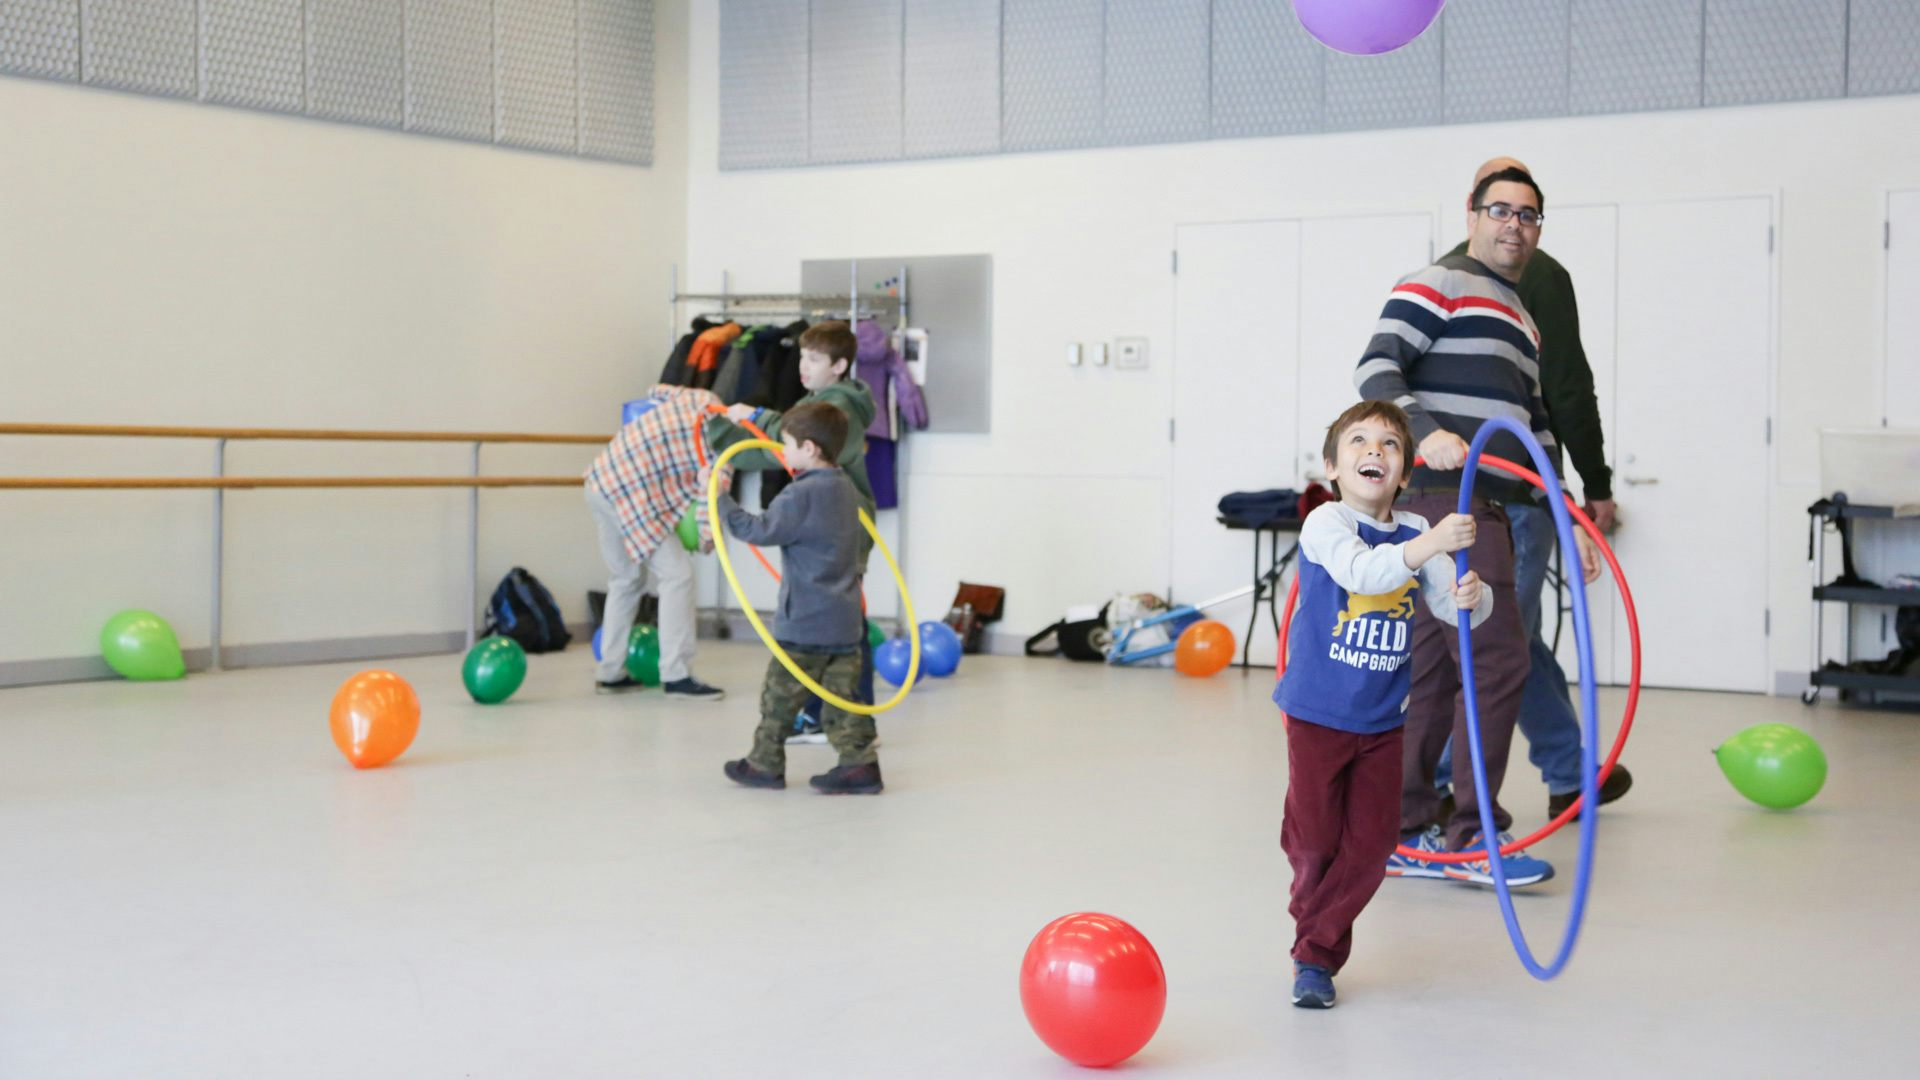 A group of people of varying ages in a room play with multi-colored balloons and hula hoops.